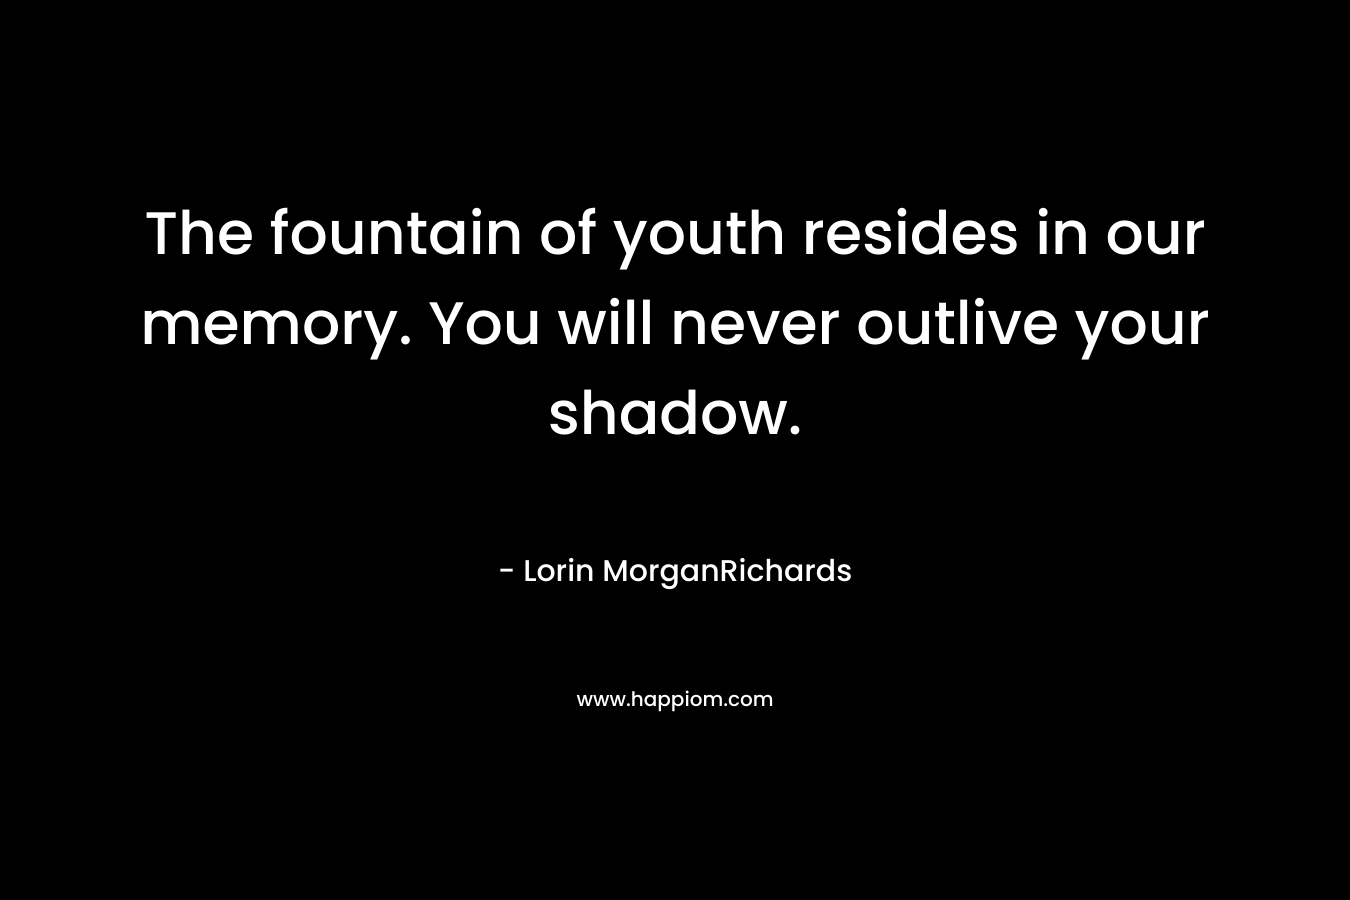 The fountain of youth resides in our memory. You will never outlive your shadow. – Lorin MorganRichards